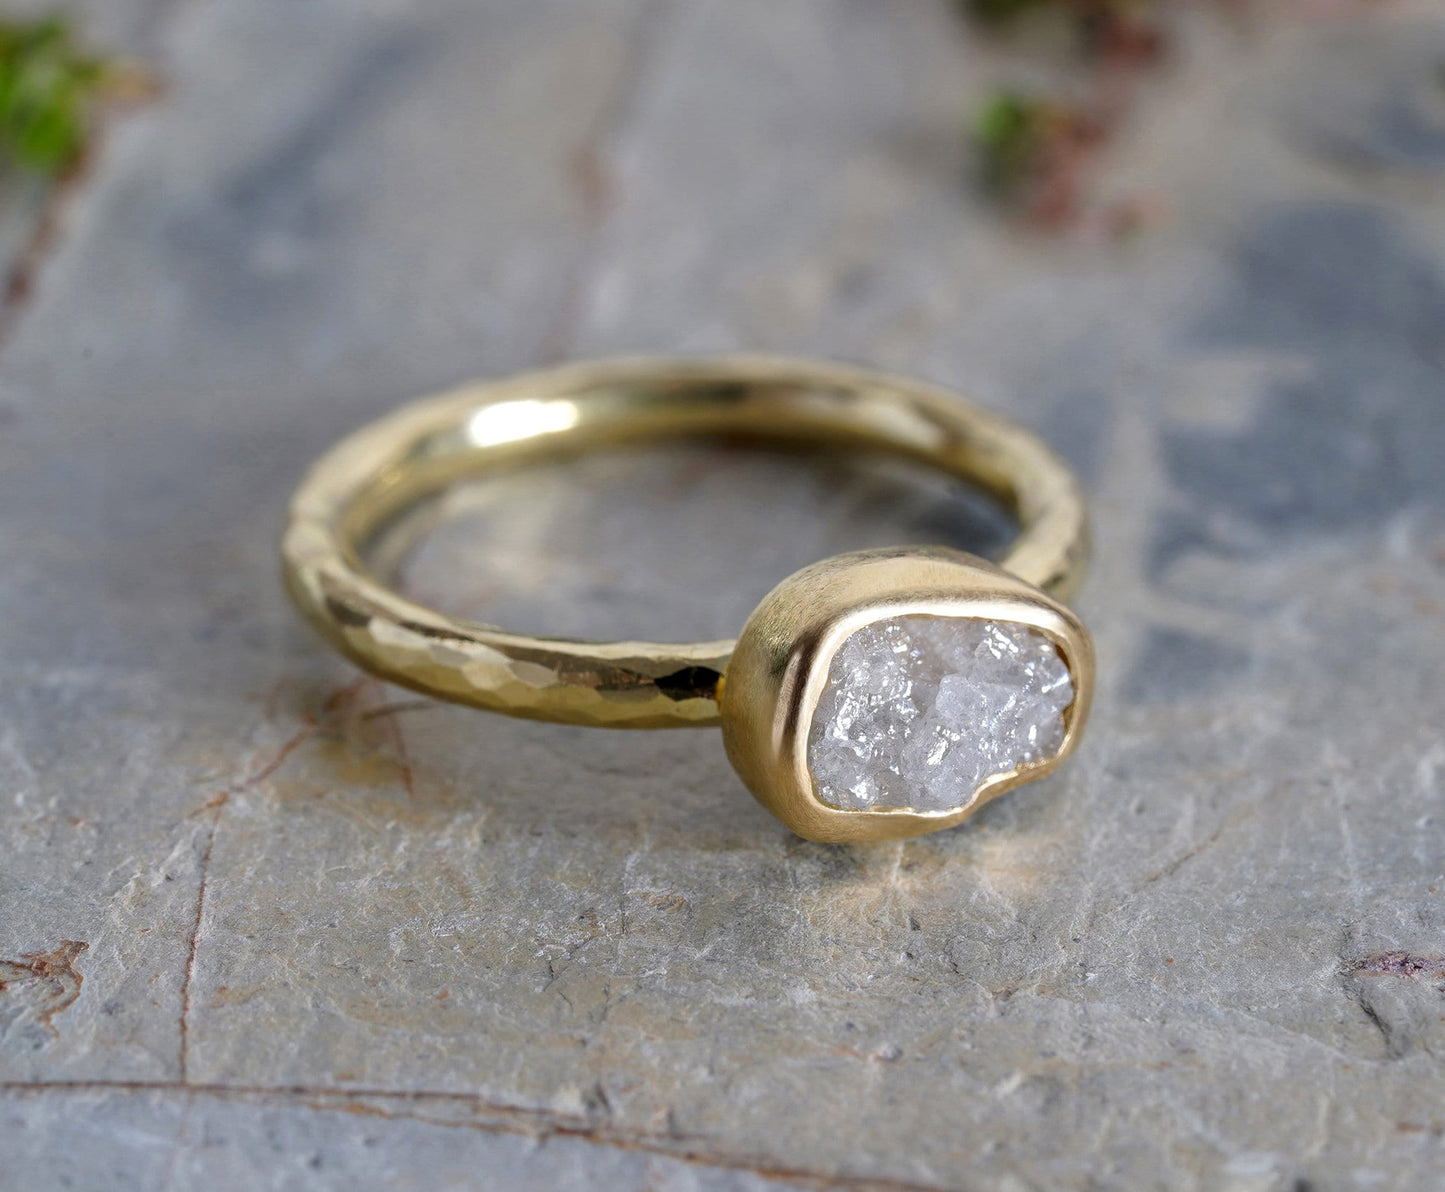 1.40ct Light Grey Diamond Engagement Ring in 18ct Yellow Gold, Rough Diamond Ring, Rustic Diamond Ring in Solid Yellow Gold